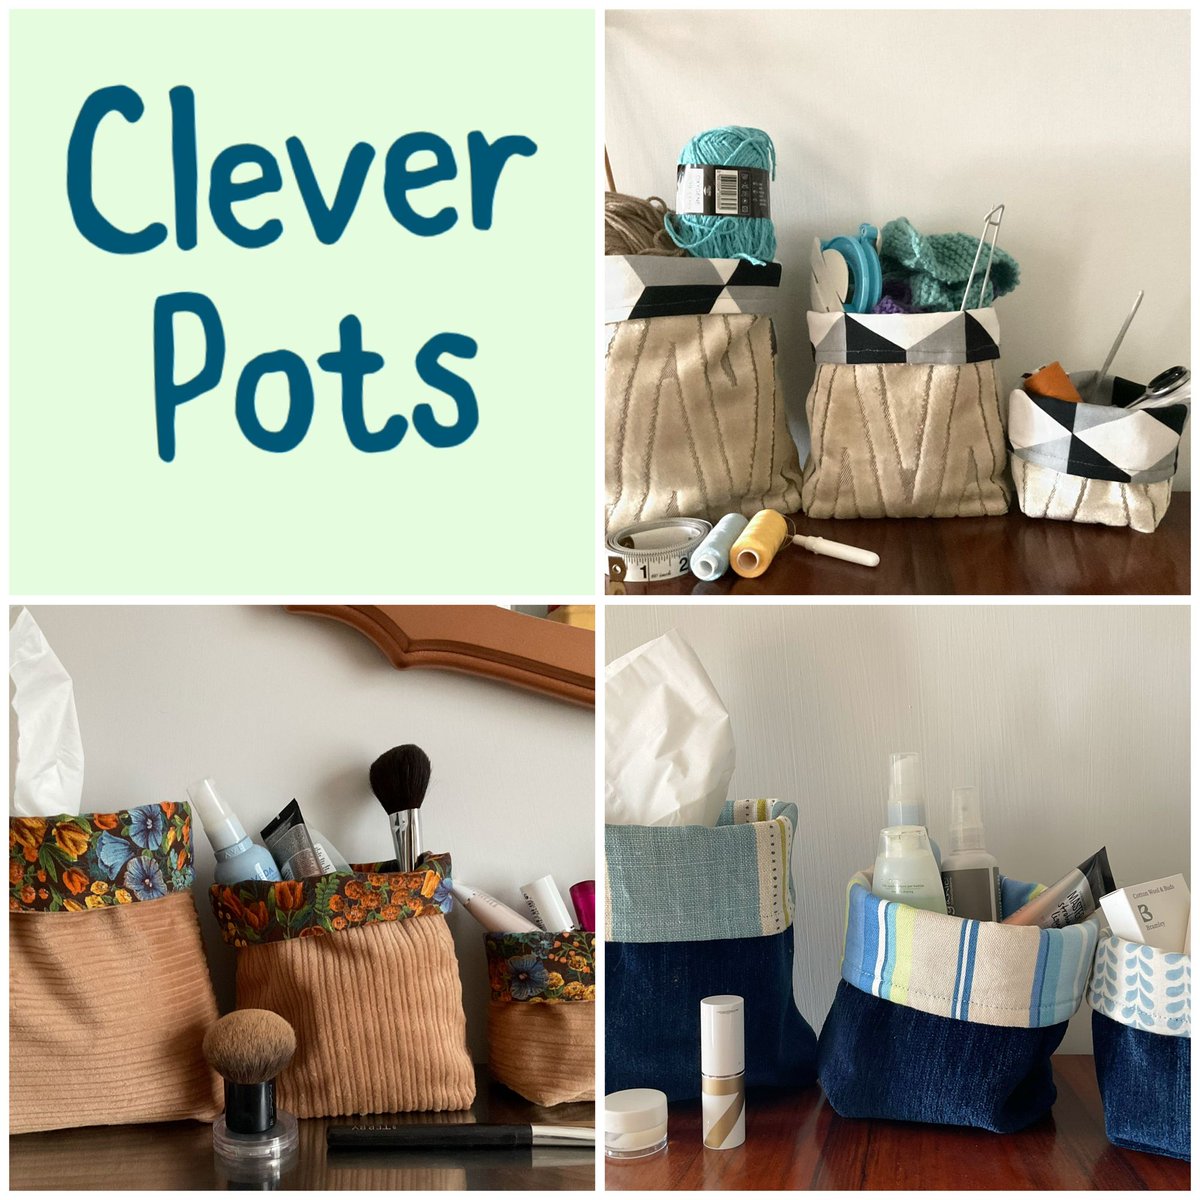 My Clever Pots - the perfect and pretty storage option. Ideal for cosmetics, craft zone, nursery or pet products tidying. Made from recycled upholstery fabric offcuts, so they are eco friendly too. #UKGiftHour #MHHSBD #shopindie buff.ly/2F1nKi1